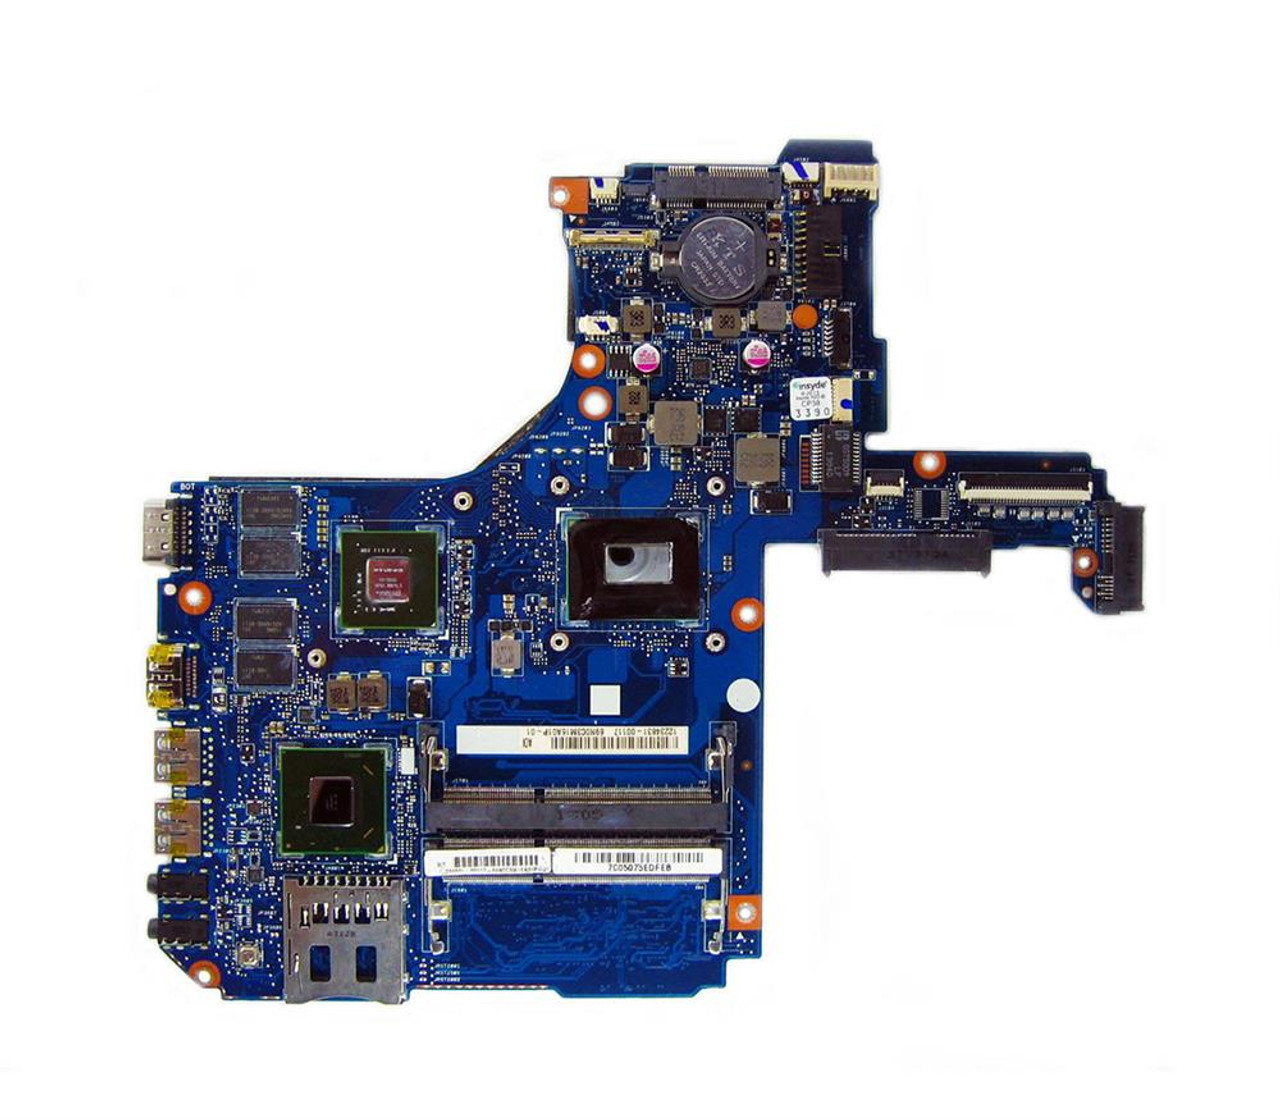 vrouw Wild hoog H000057470 Toshiba System Board (Motherboard) with Intel Core i5-3337u  1.8GHz Processor for S50 Laptop (